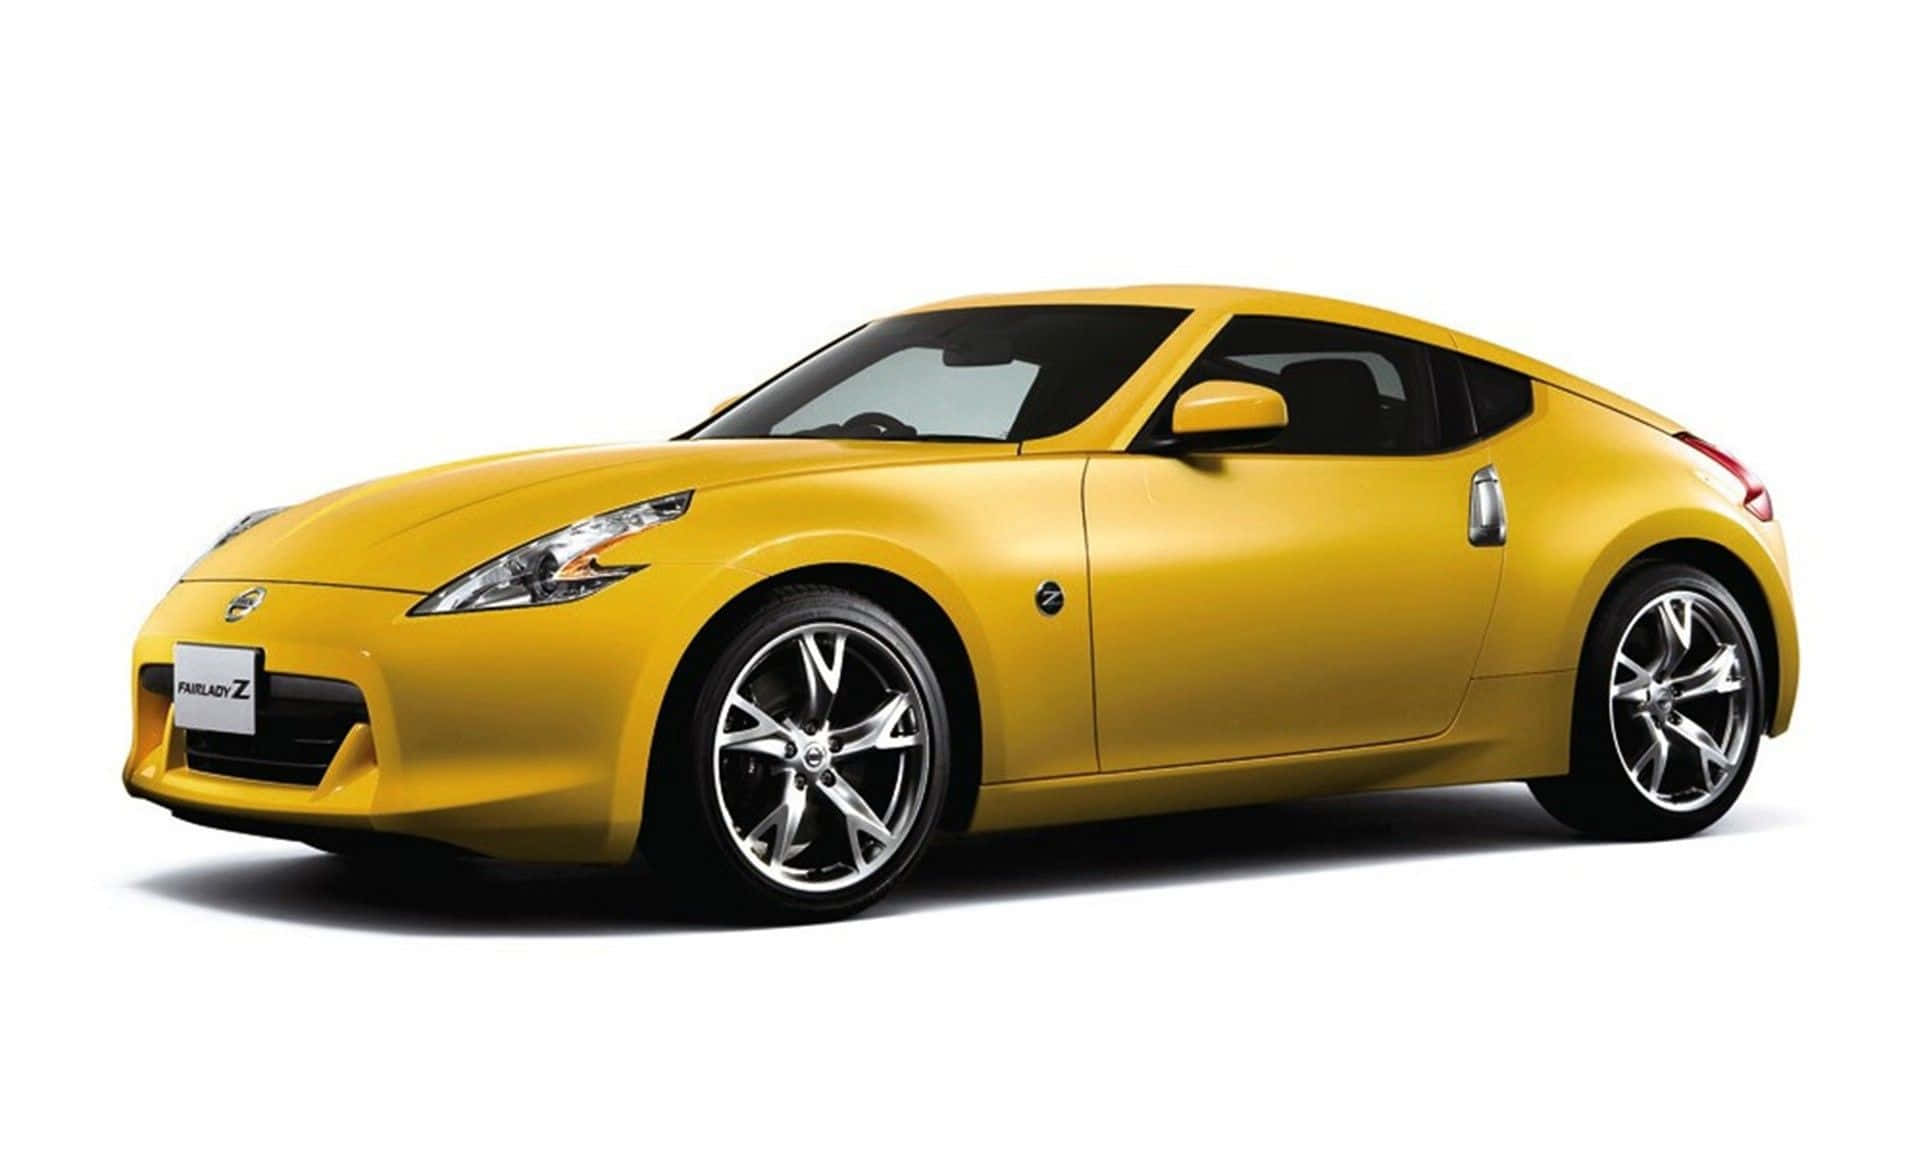 Stunning Yellow Sports Car in Motion Wallpaper